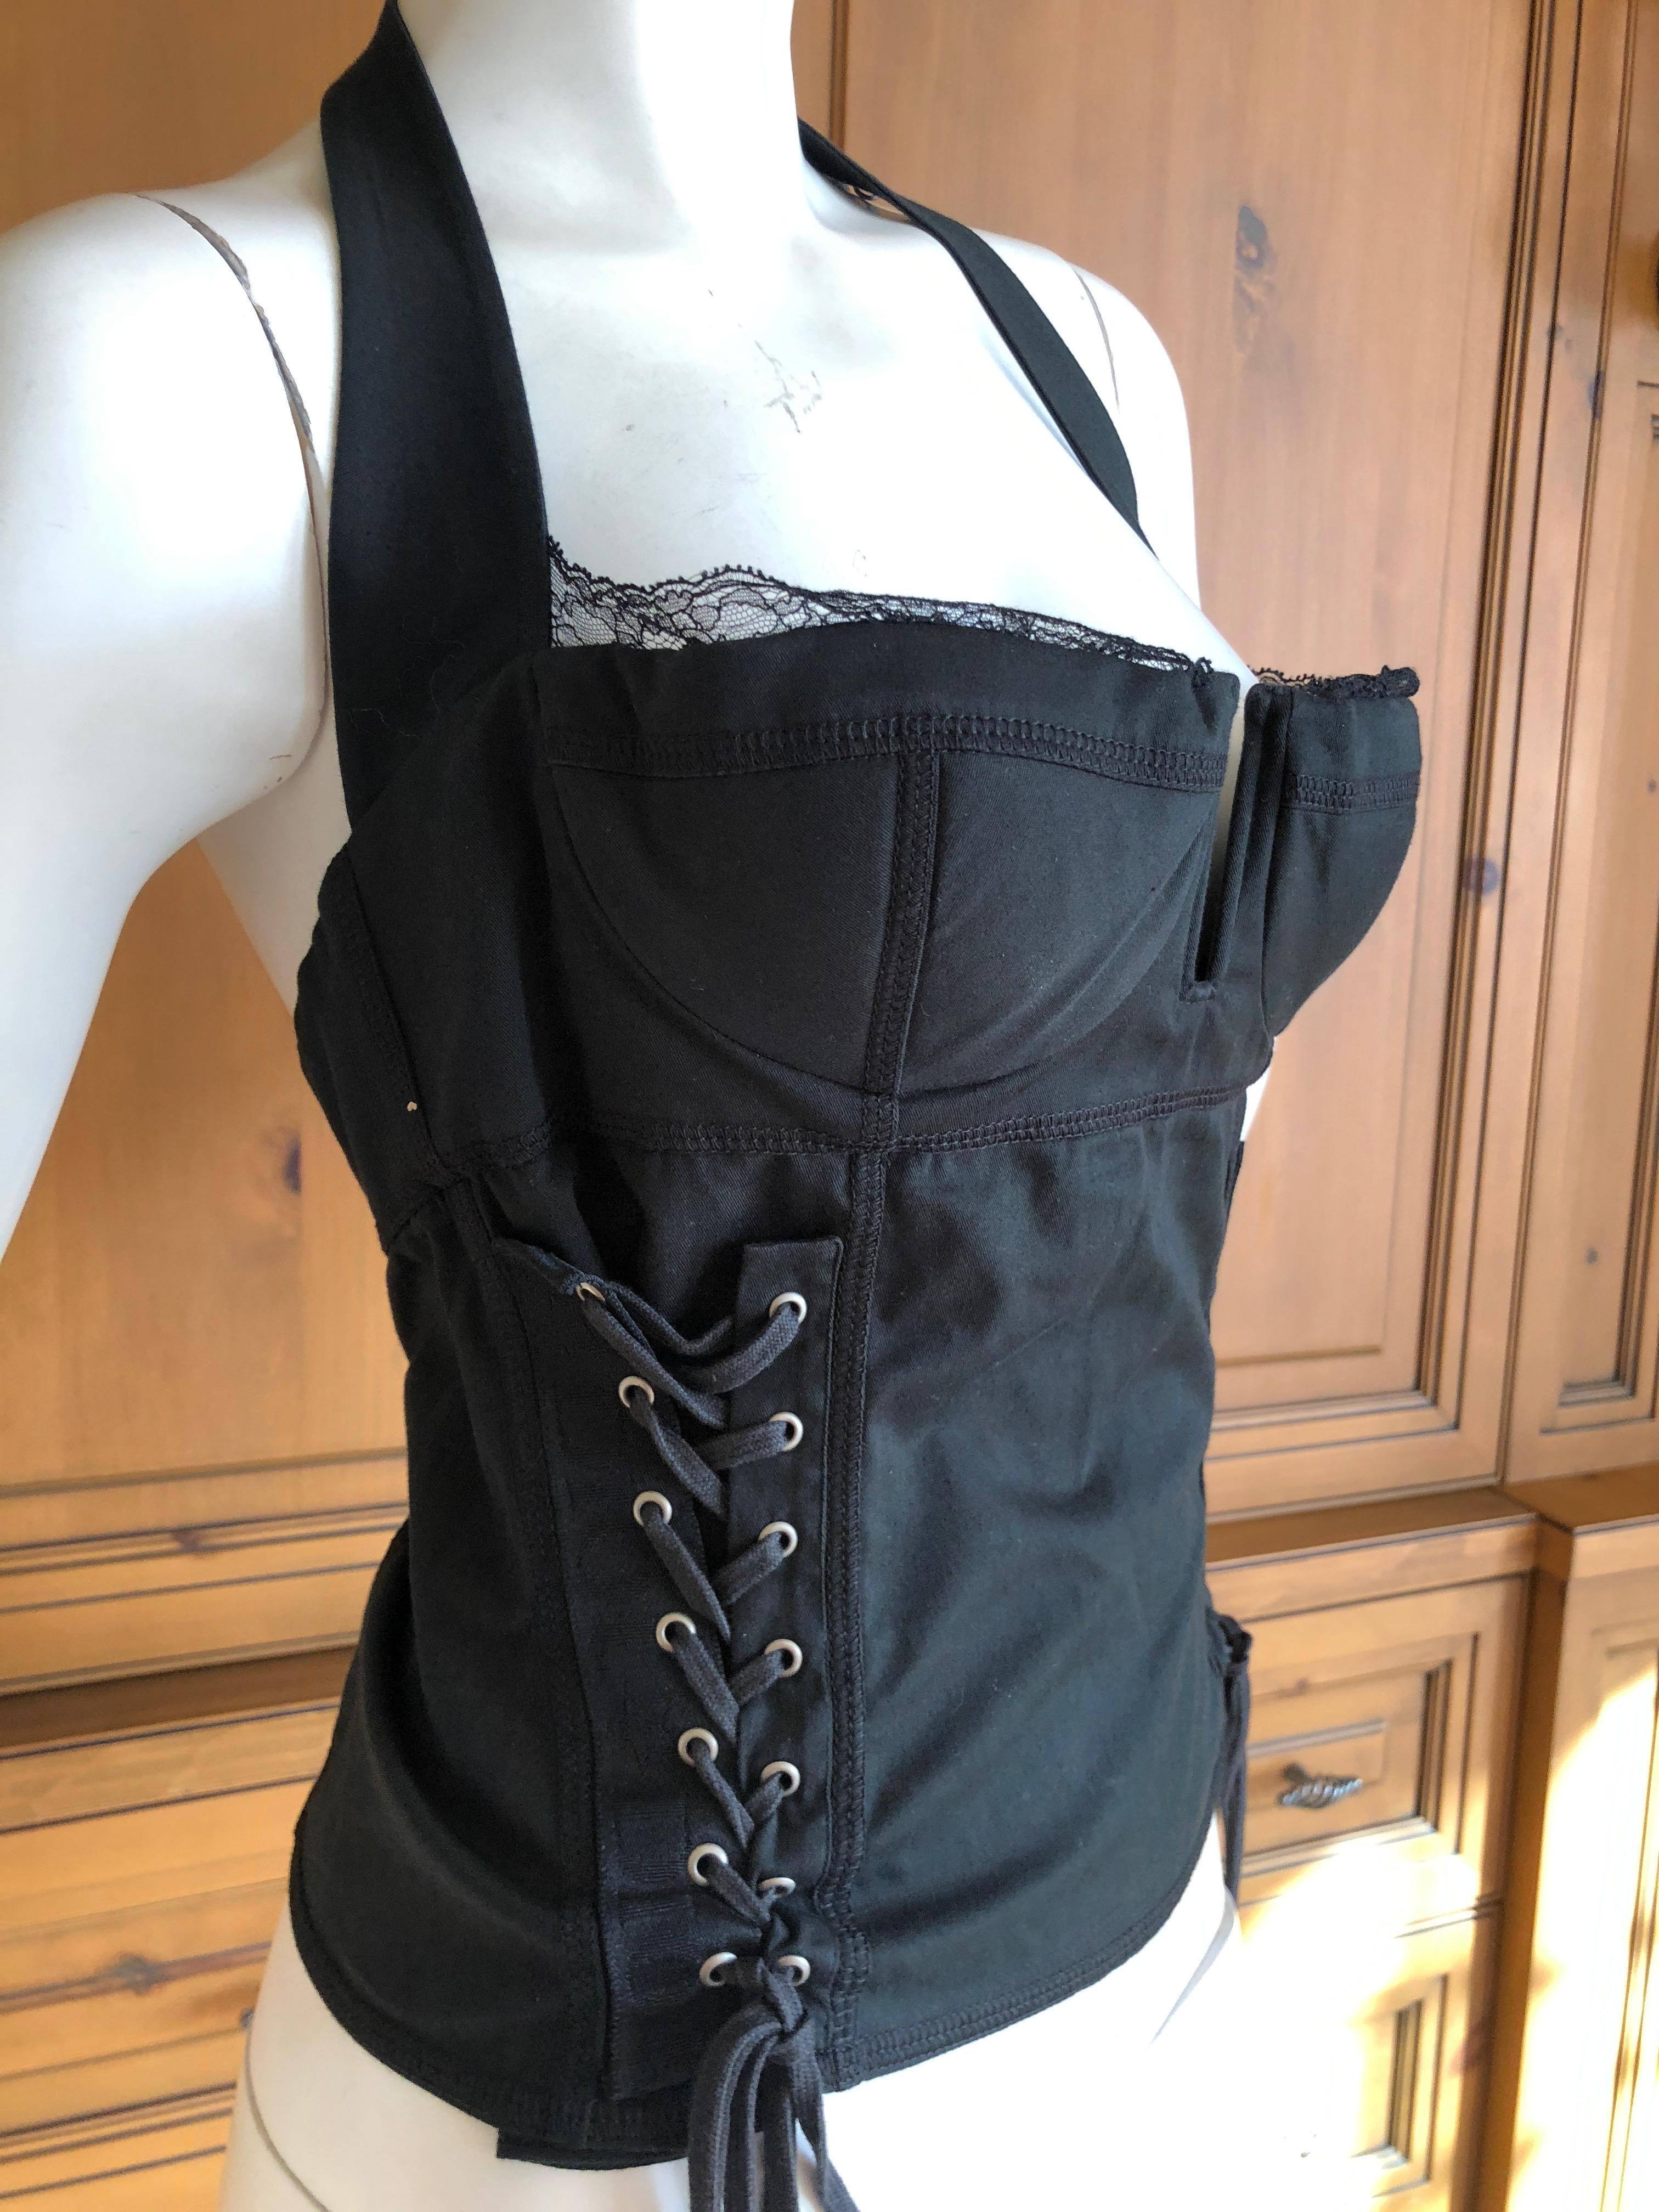 Wonderful vintage lace corset from Christian Dior 
Cotton with corset lace up details.
Marked 42
Bust 36